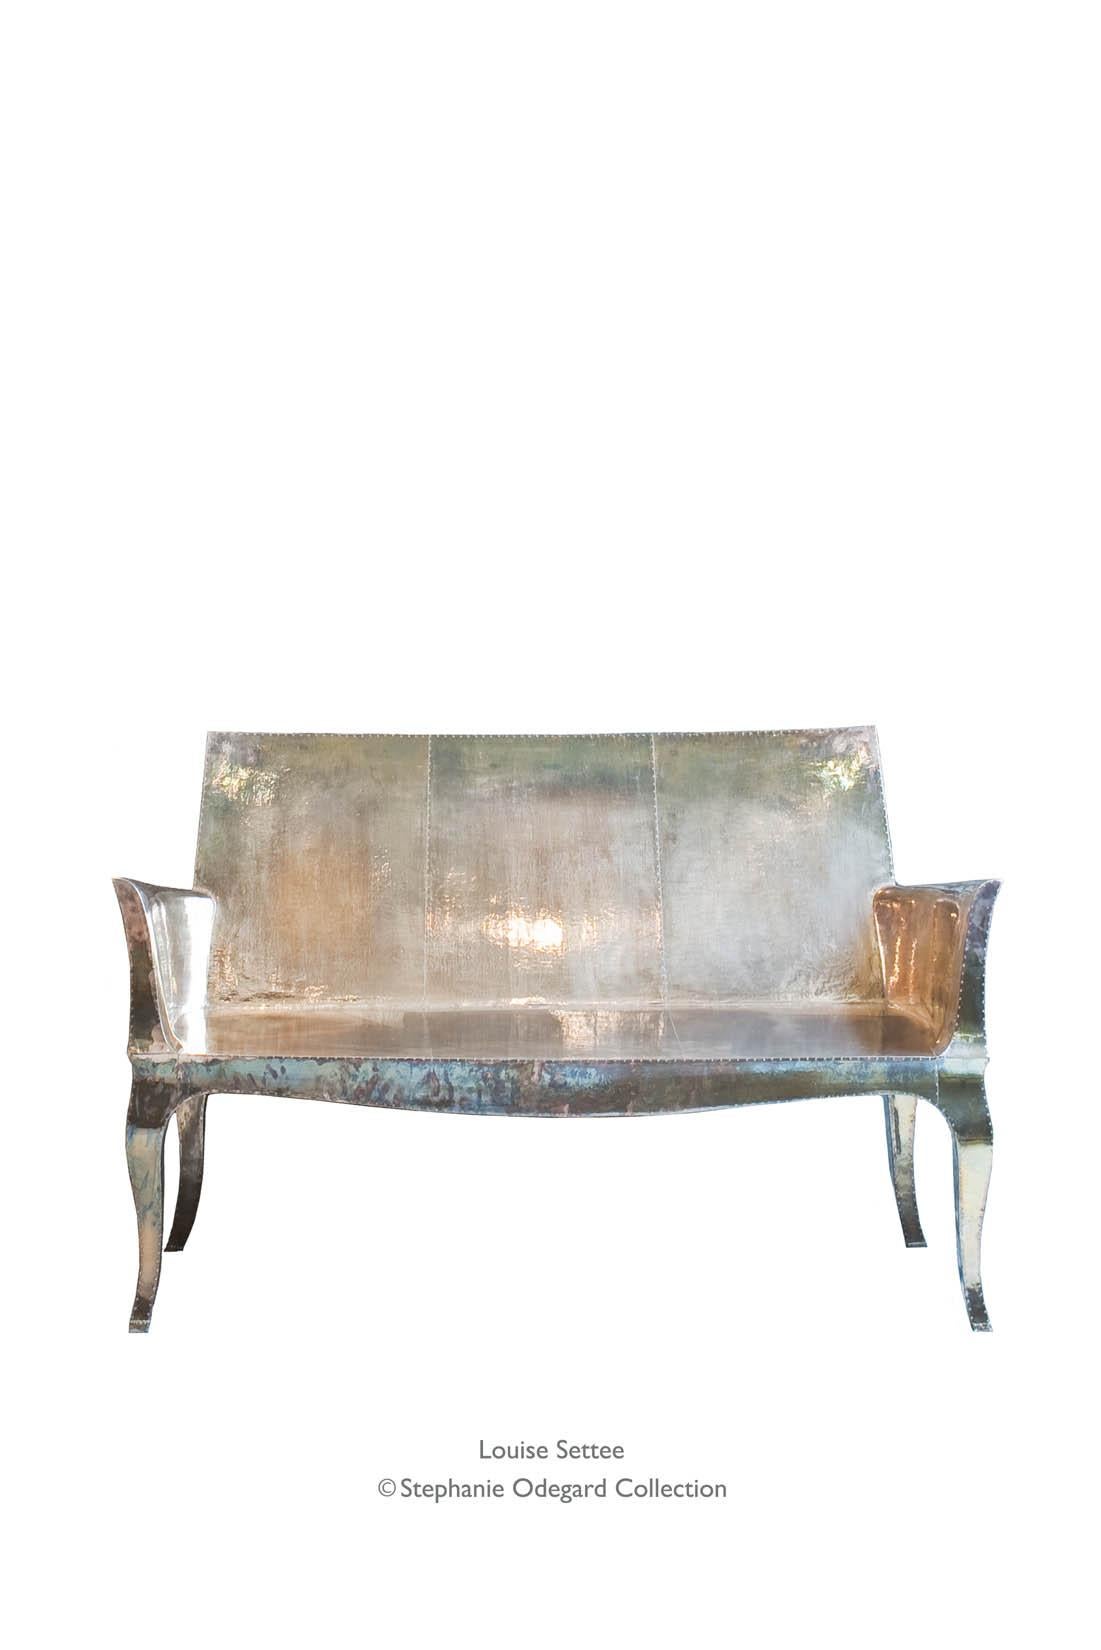 Louise Settee Art Deco Daybeds in Mid. Hammered Copper by Paul Mathieu For Sale 6